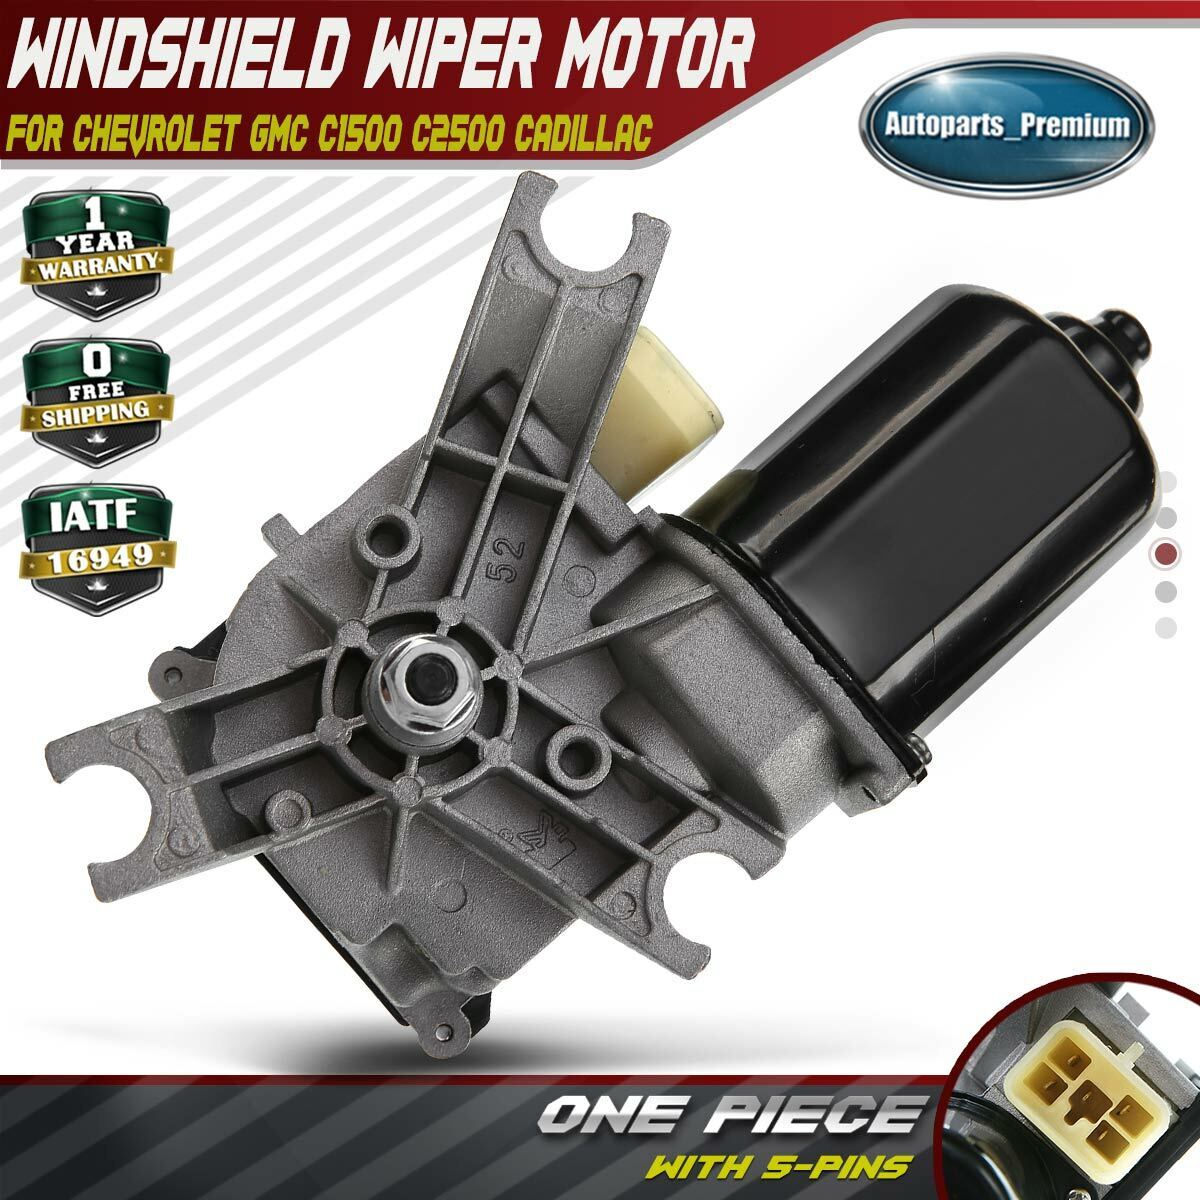 Front Windshield Wiper Motor for Chevy GMC C1500 K1500 Cadillac Escalade 40-158